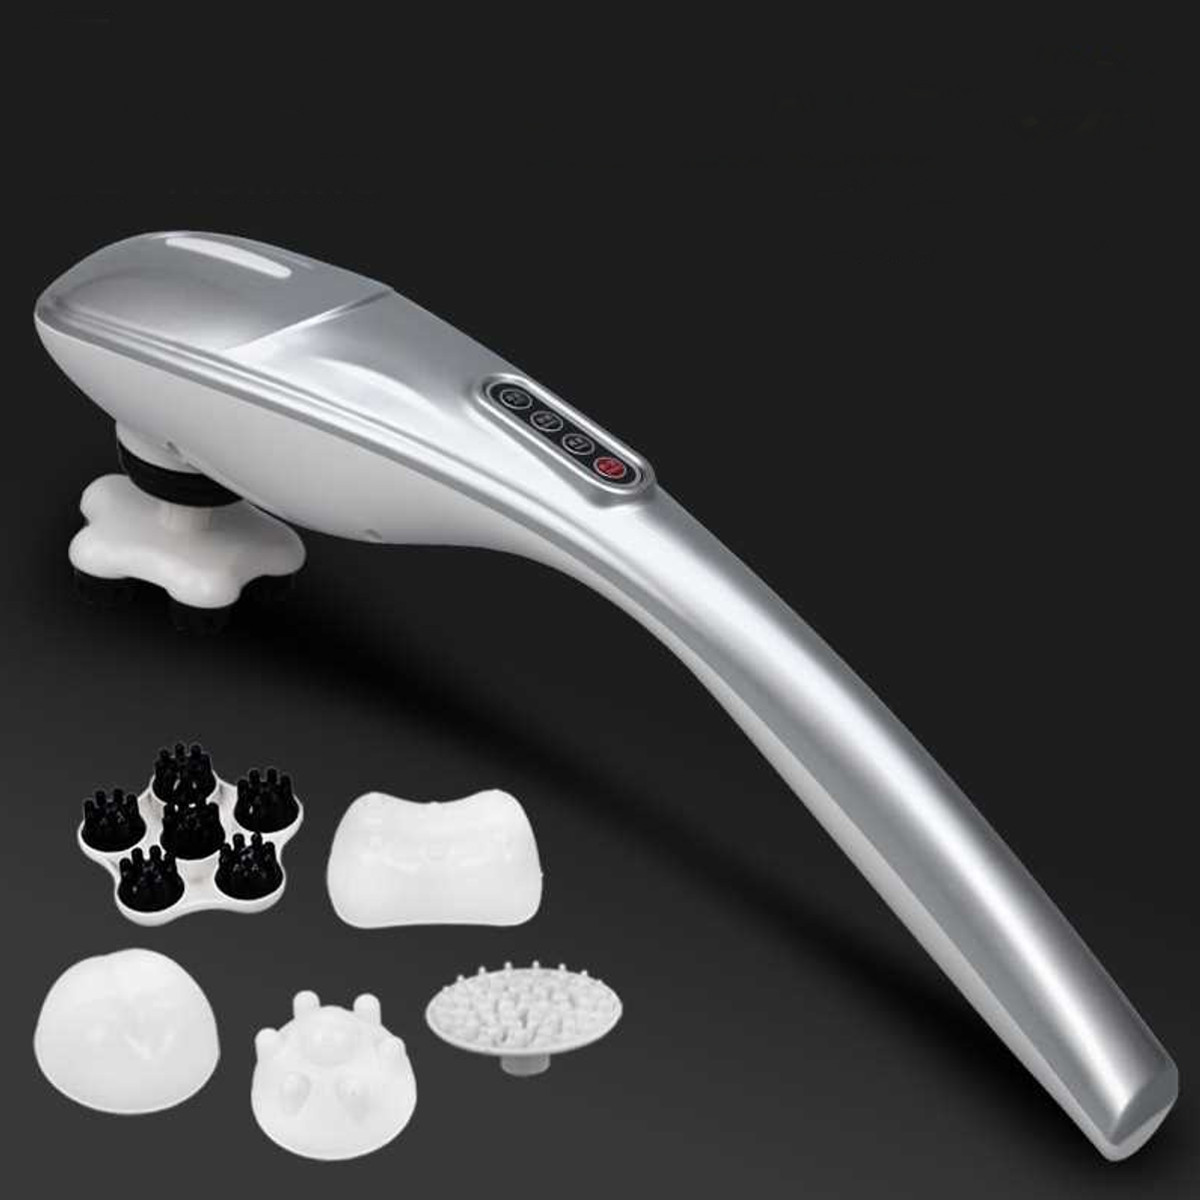 Auto electric massager handheld body neck back foot vibrating therapy machine with 5 head Sale